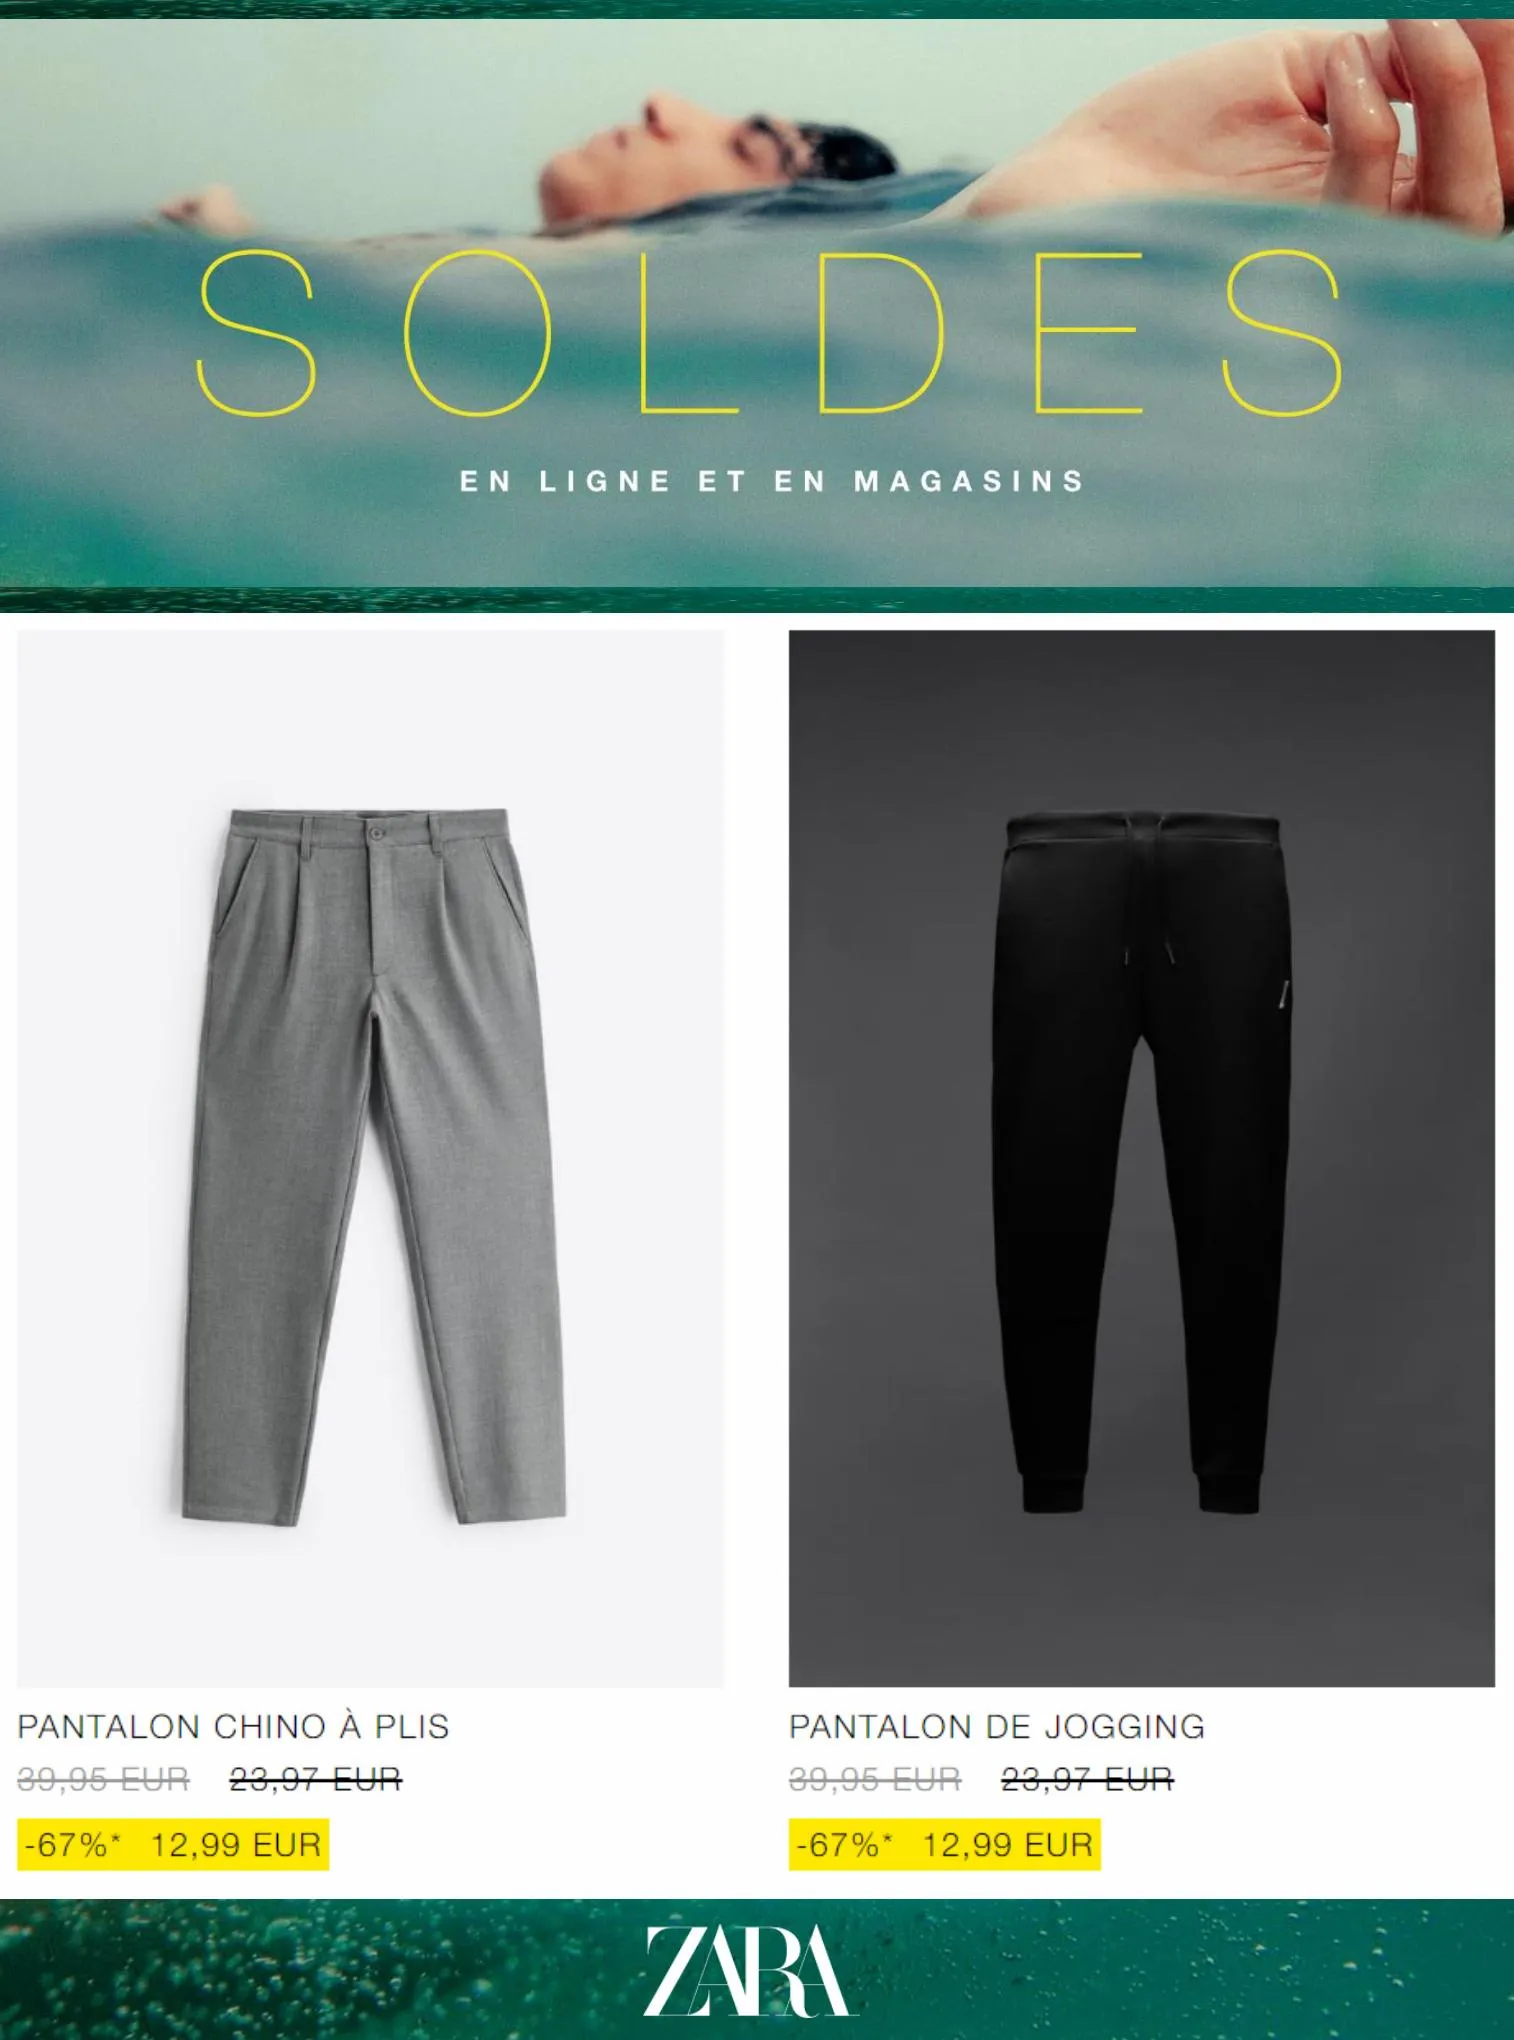 Catalogue Soldes | Homme, page 00002